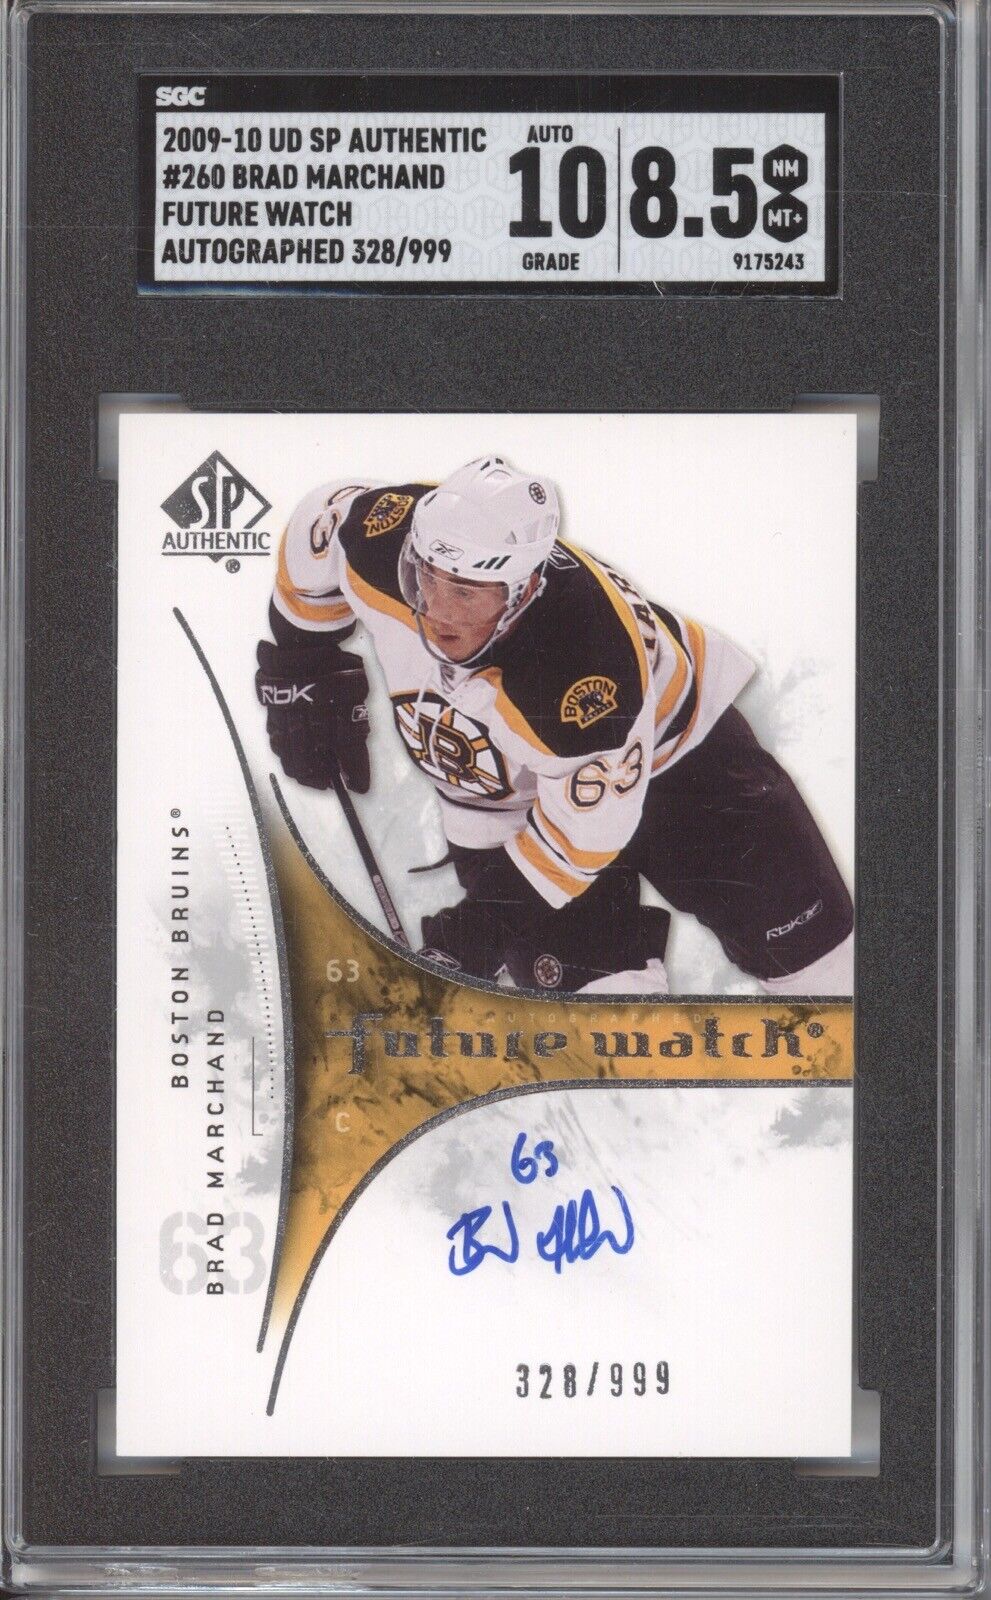 BRAD MARCHAND SGC 8.5 2009-10 UD SP AUTHENTIC #260 ROOKIE FUTURE WATCH AUTO /999